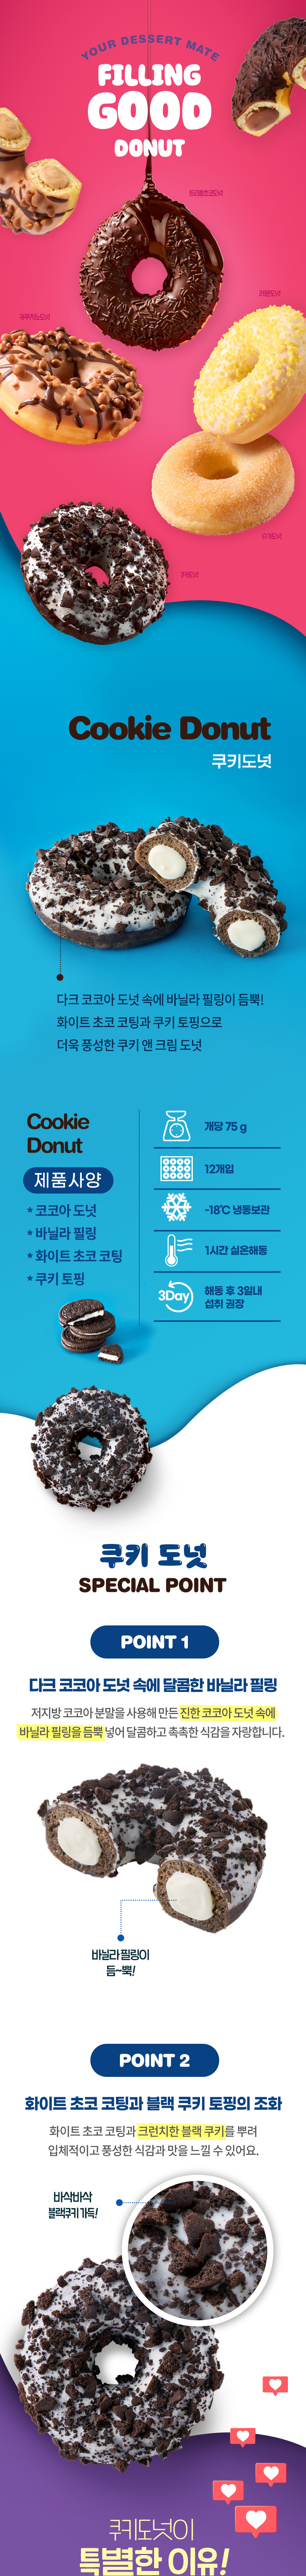 Filing_Good_Donut_Cookie_01